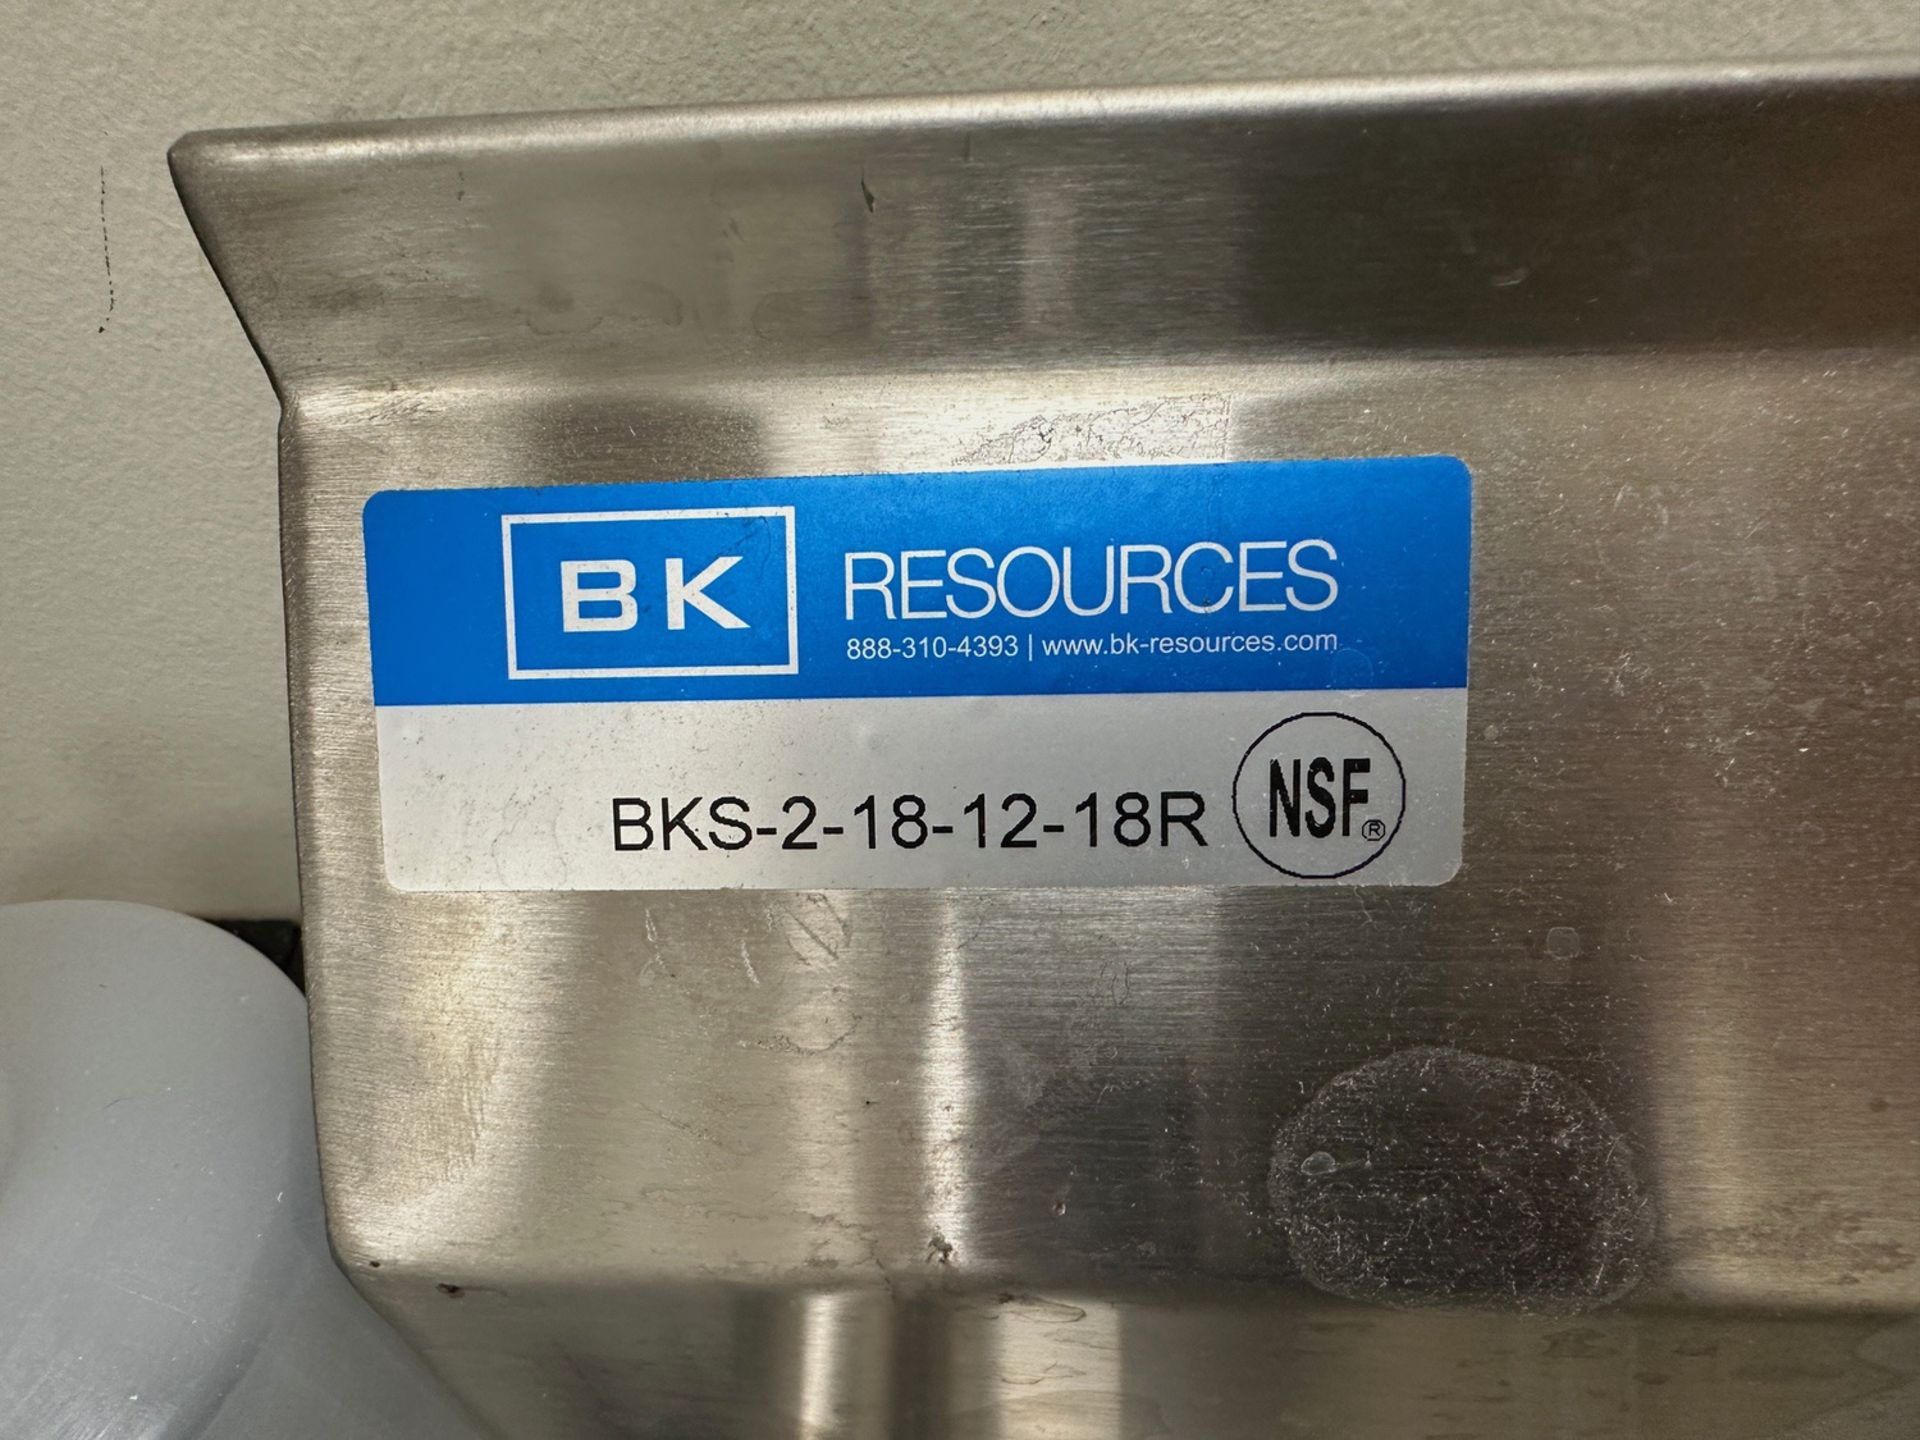 BK Resources Stainless Steel 2-Compartment Sink (Approx. 57" x 2') | Rig Fee $75 - Image 2 of 2